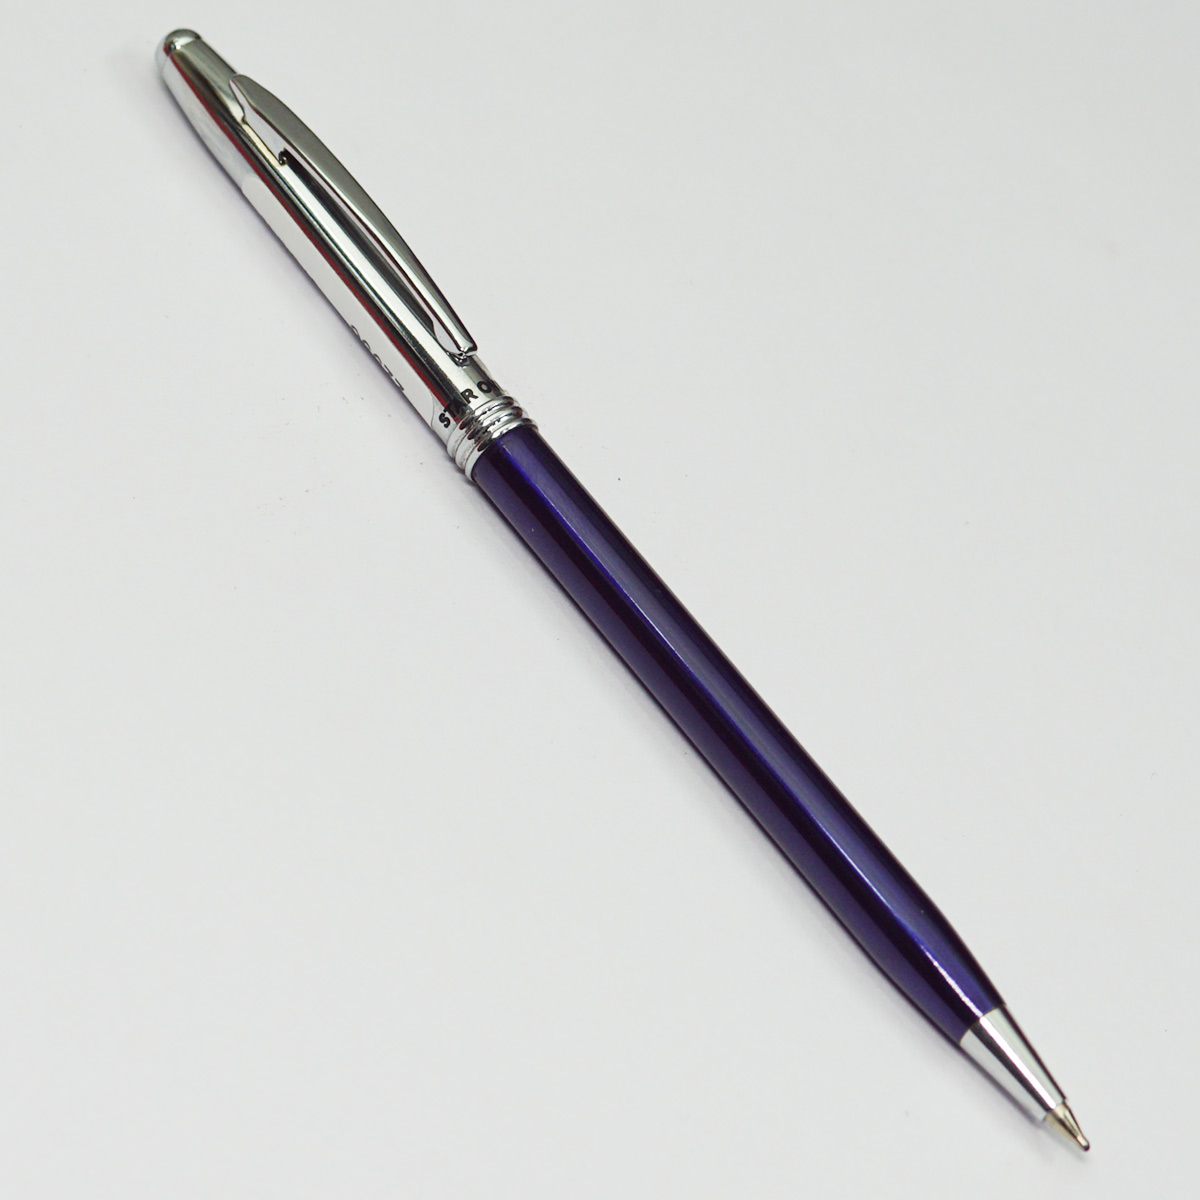 Star One Cartier Slim Glossy Blue Color Body With Silver Cap Fine Tip Twist Type Ball Pen SKU 22998